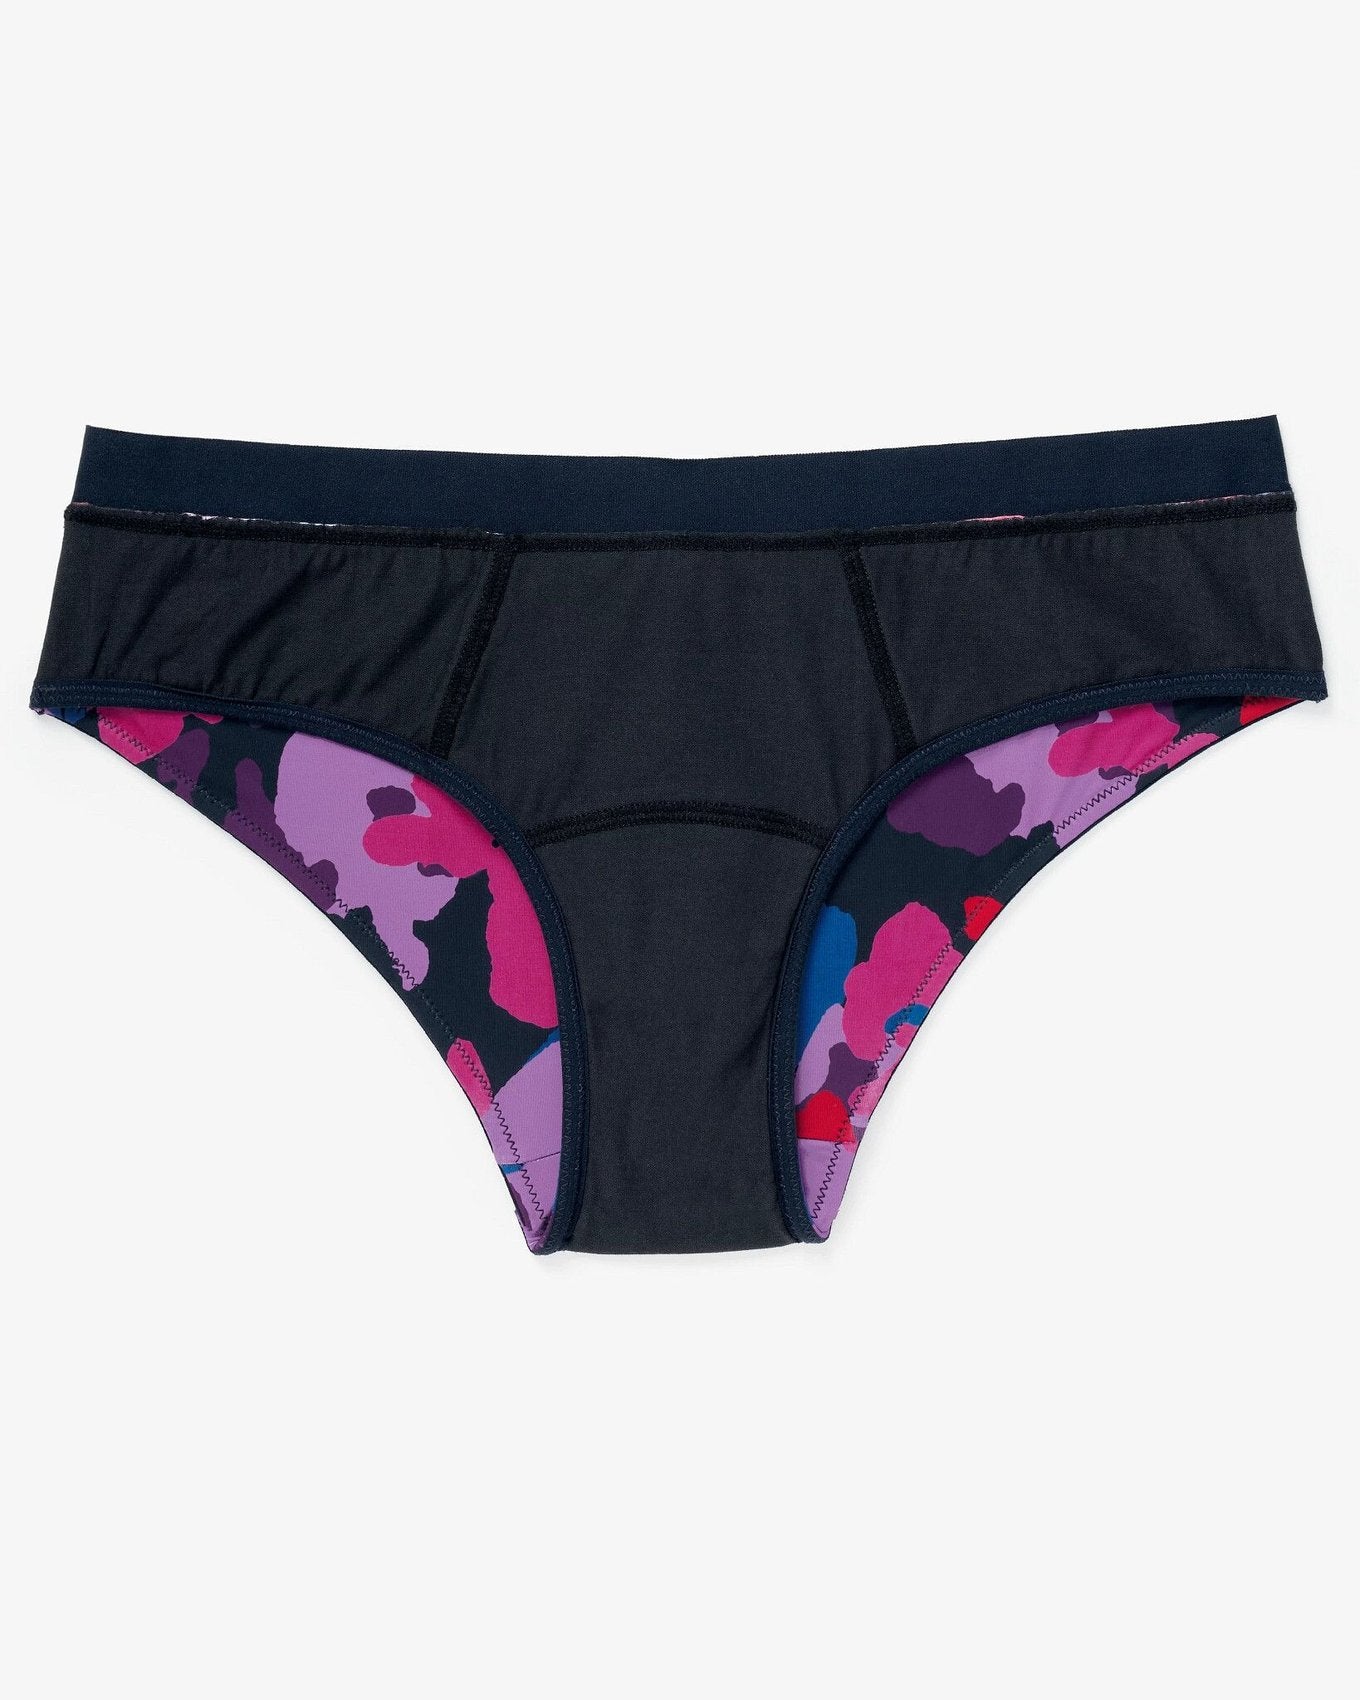 Joyja Cindy period-proof panty in color Camouflower C02 and shape cheeky